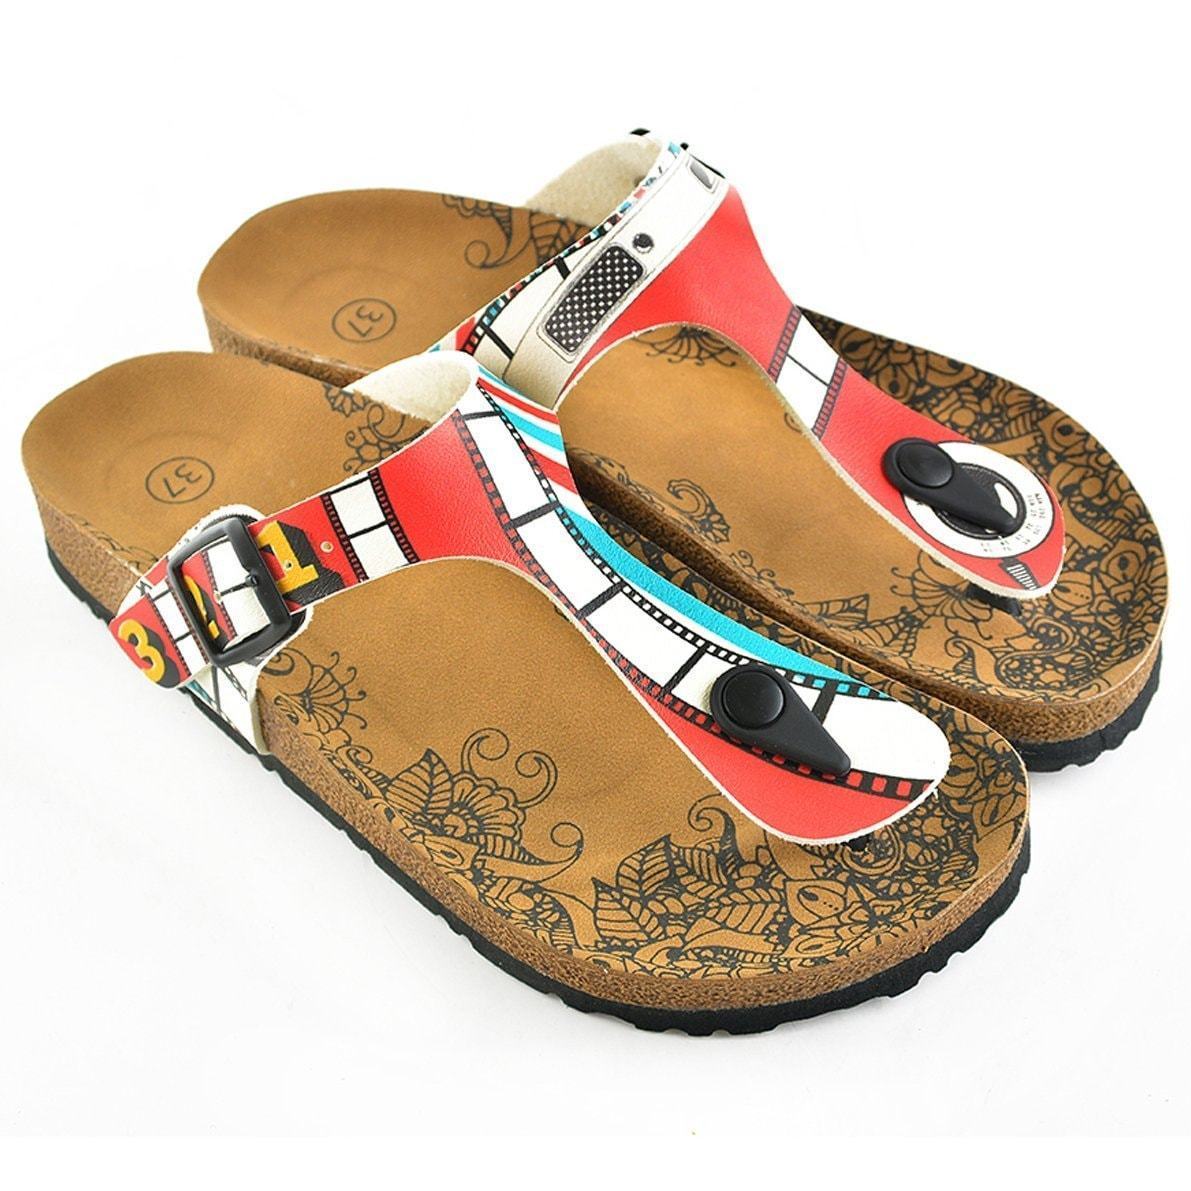 Camera Sandal CAL509, Goby, CALCEO Sandal 